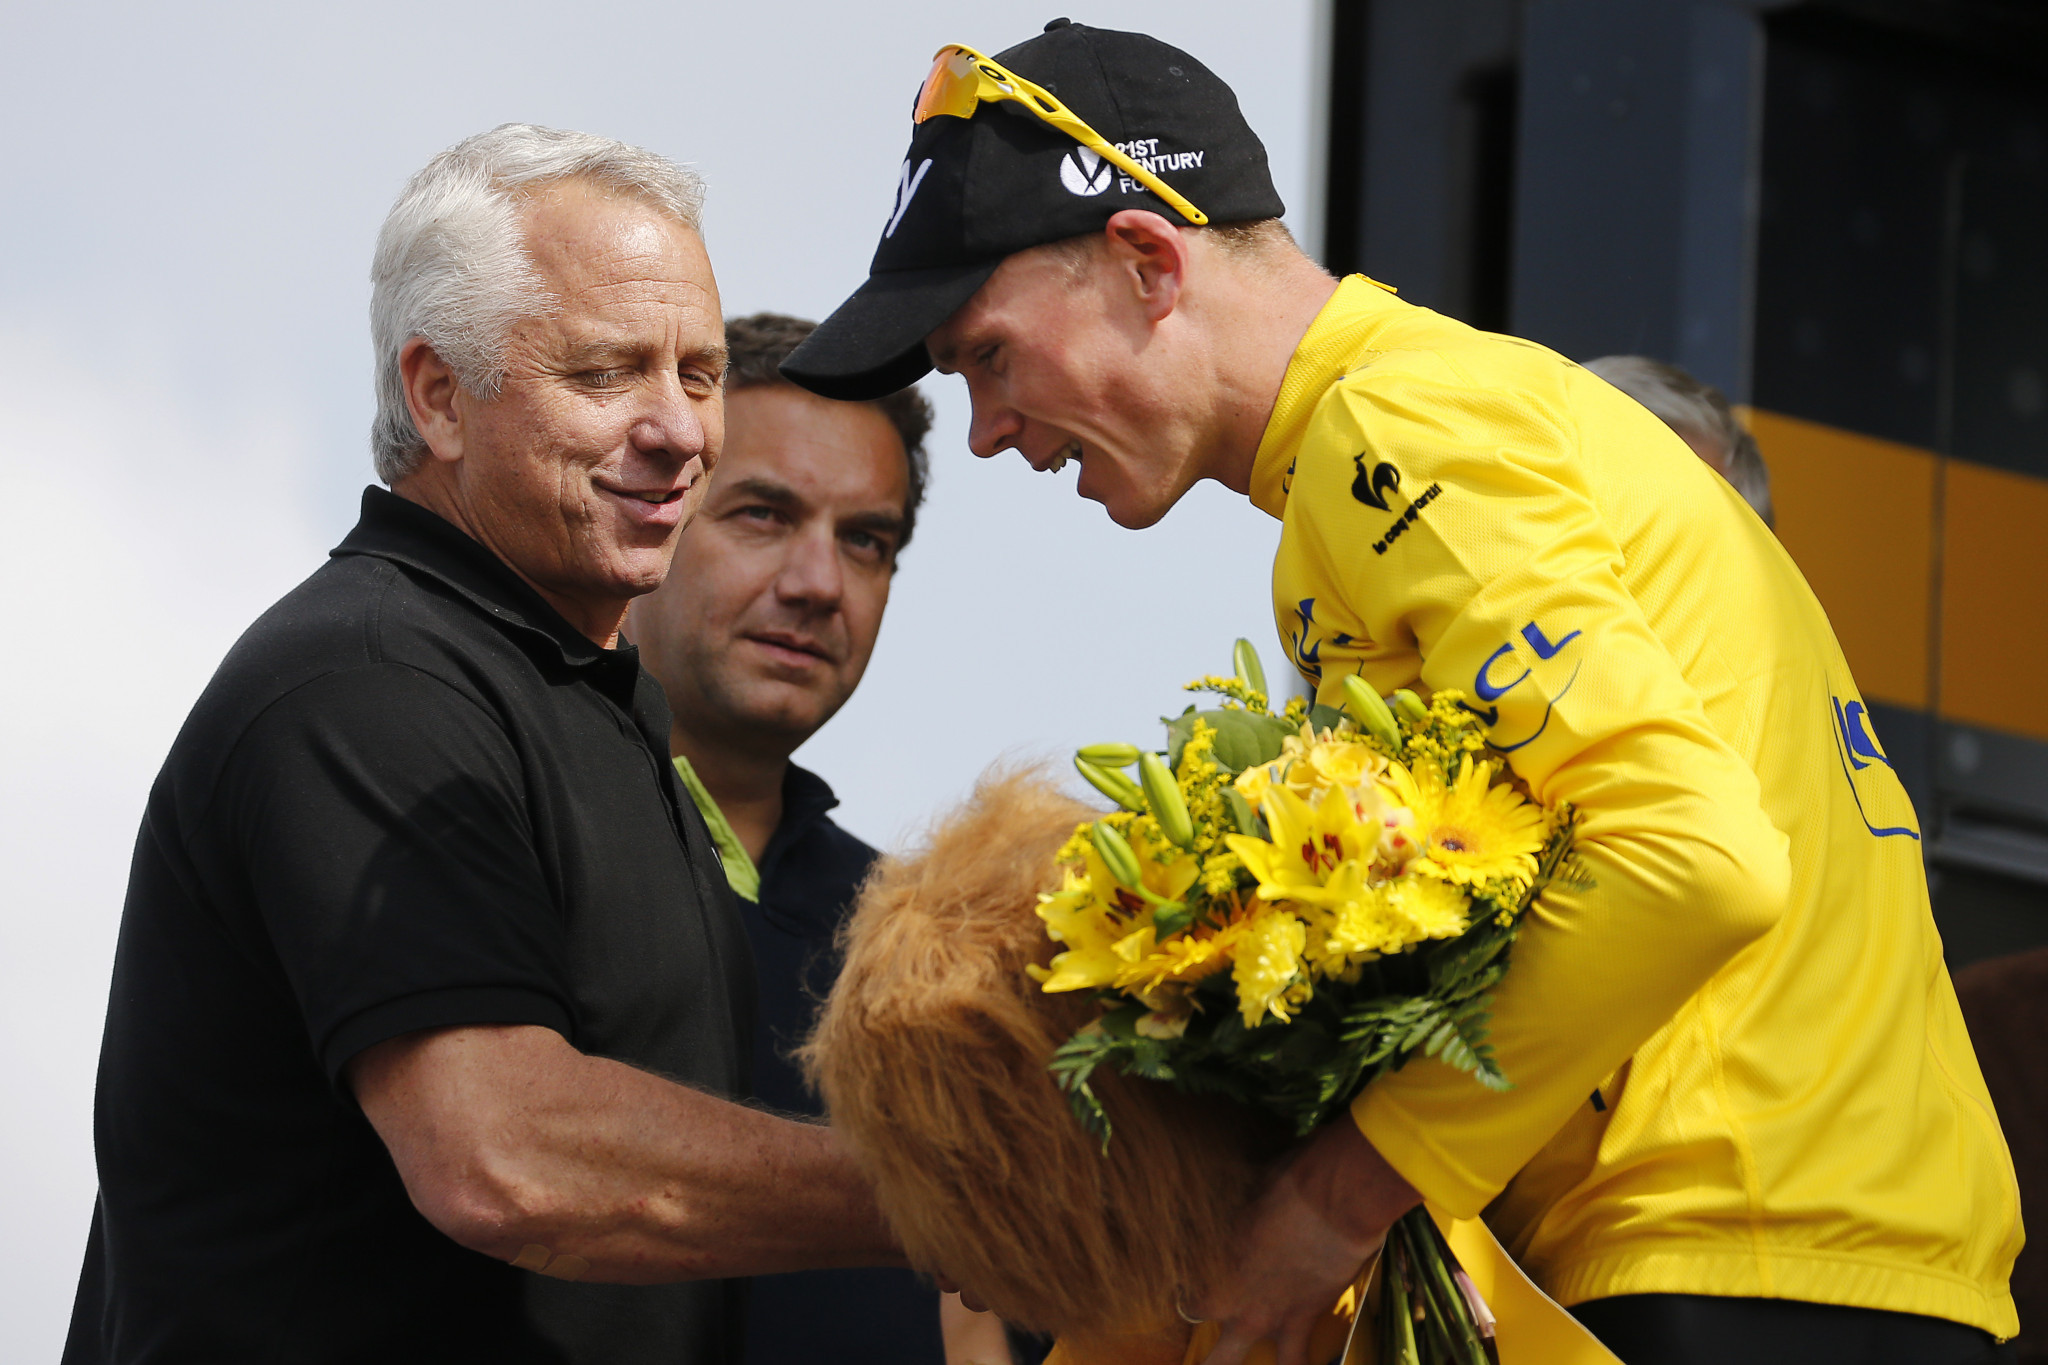 Greg LeMond, left, has claimed the excuse used by Chris Froome for his positive test is "ridiculous" ©Getty Images